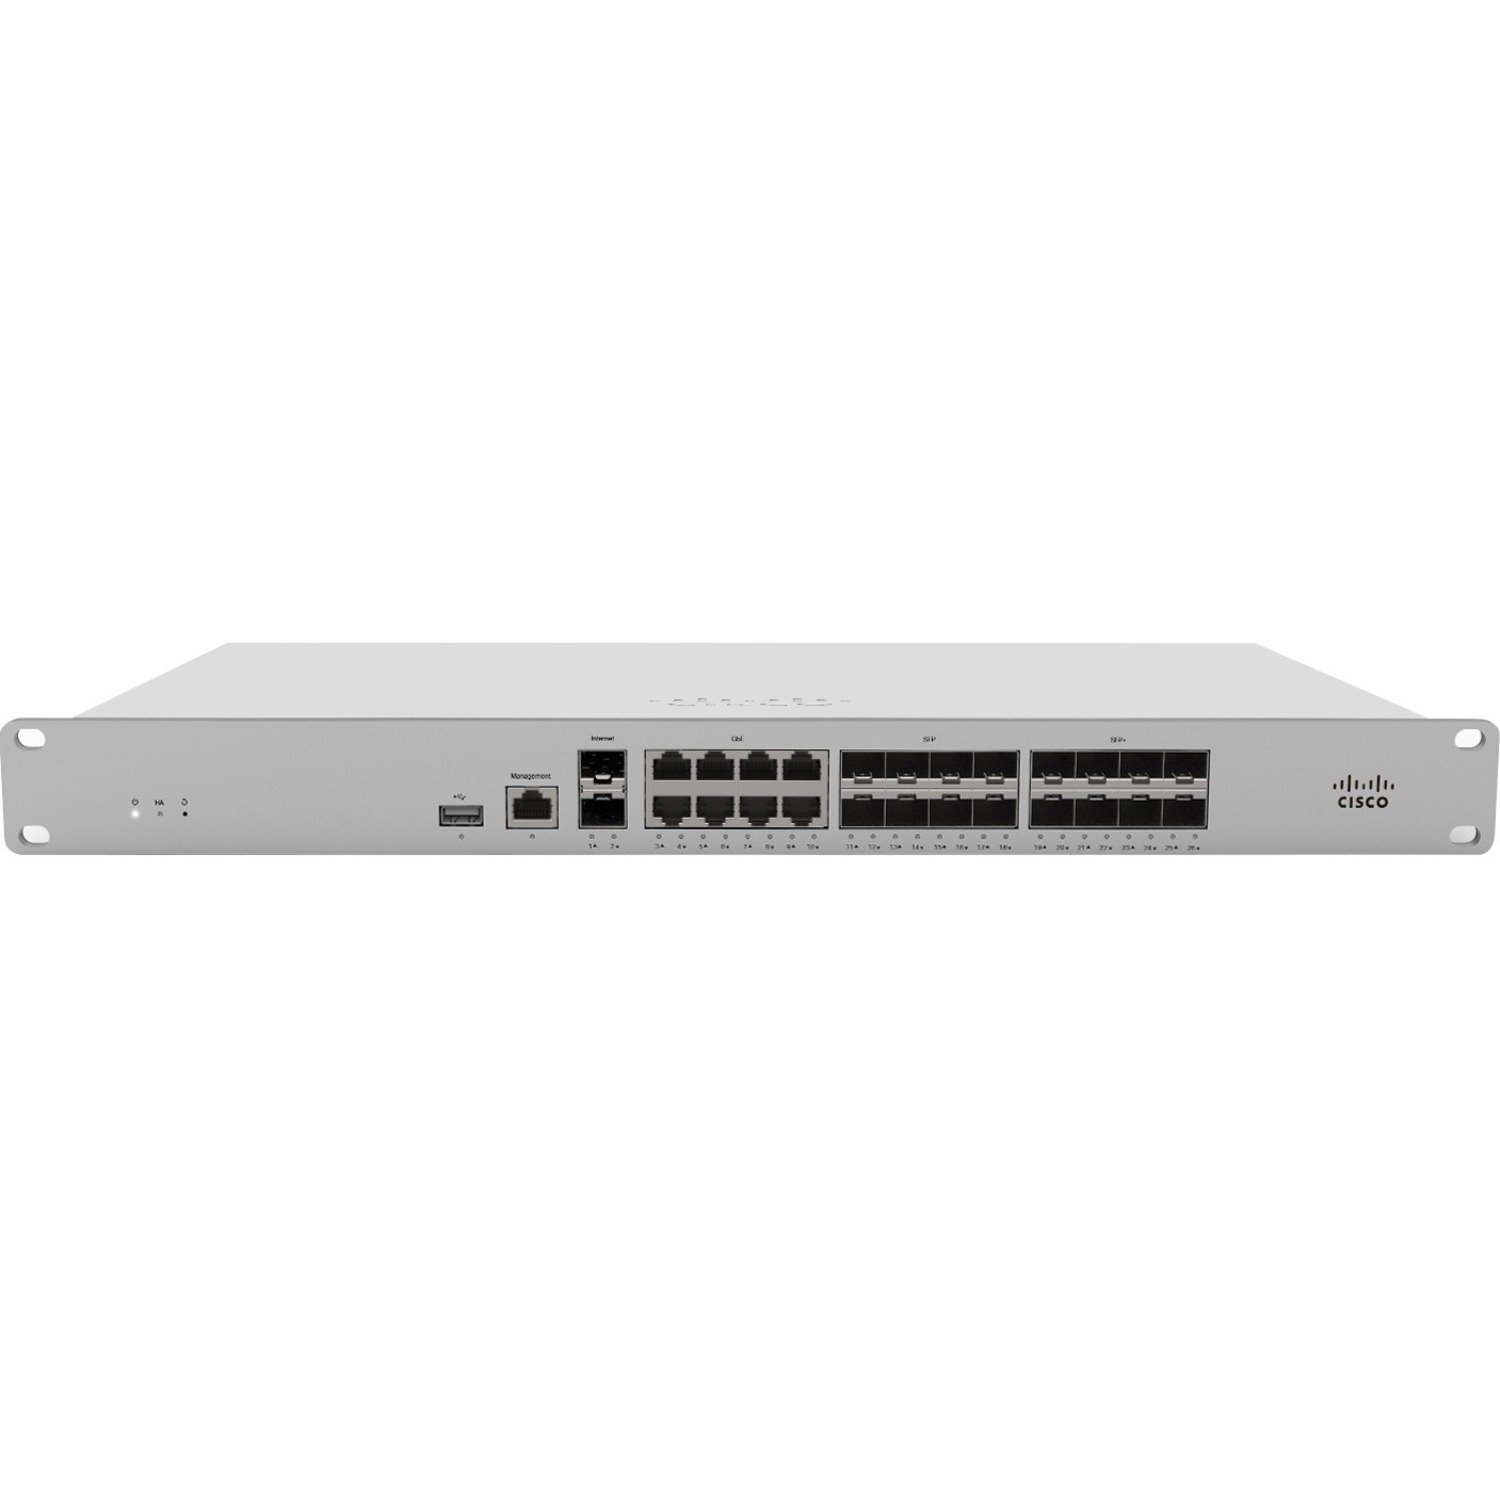 Cisco MX250 Router/Security Appliance	